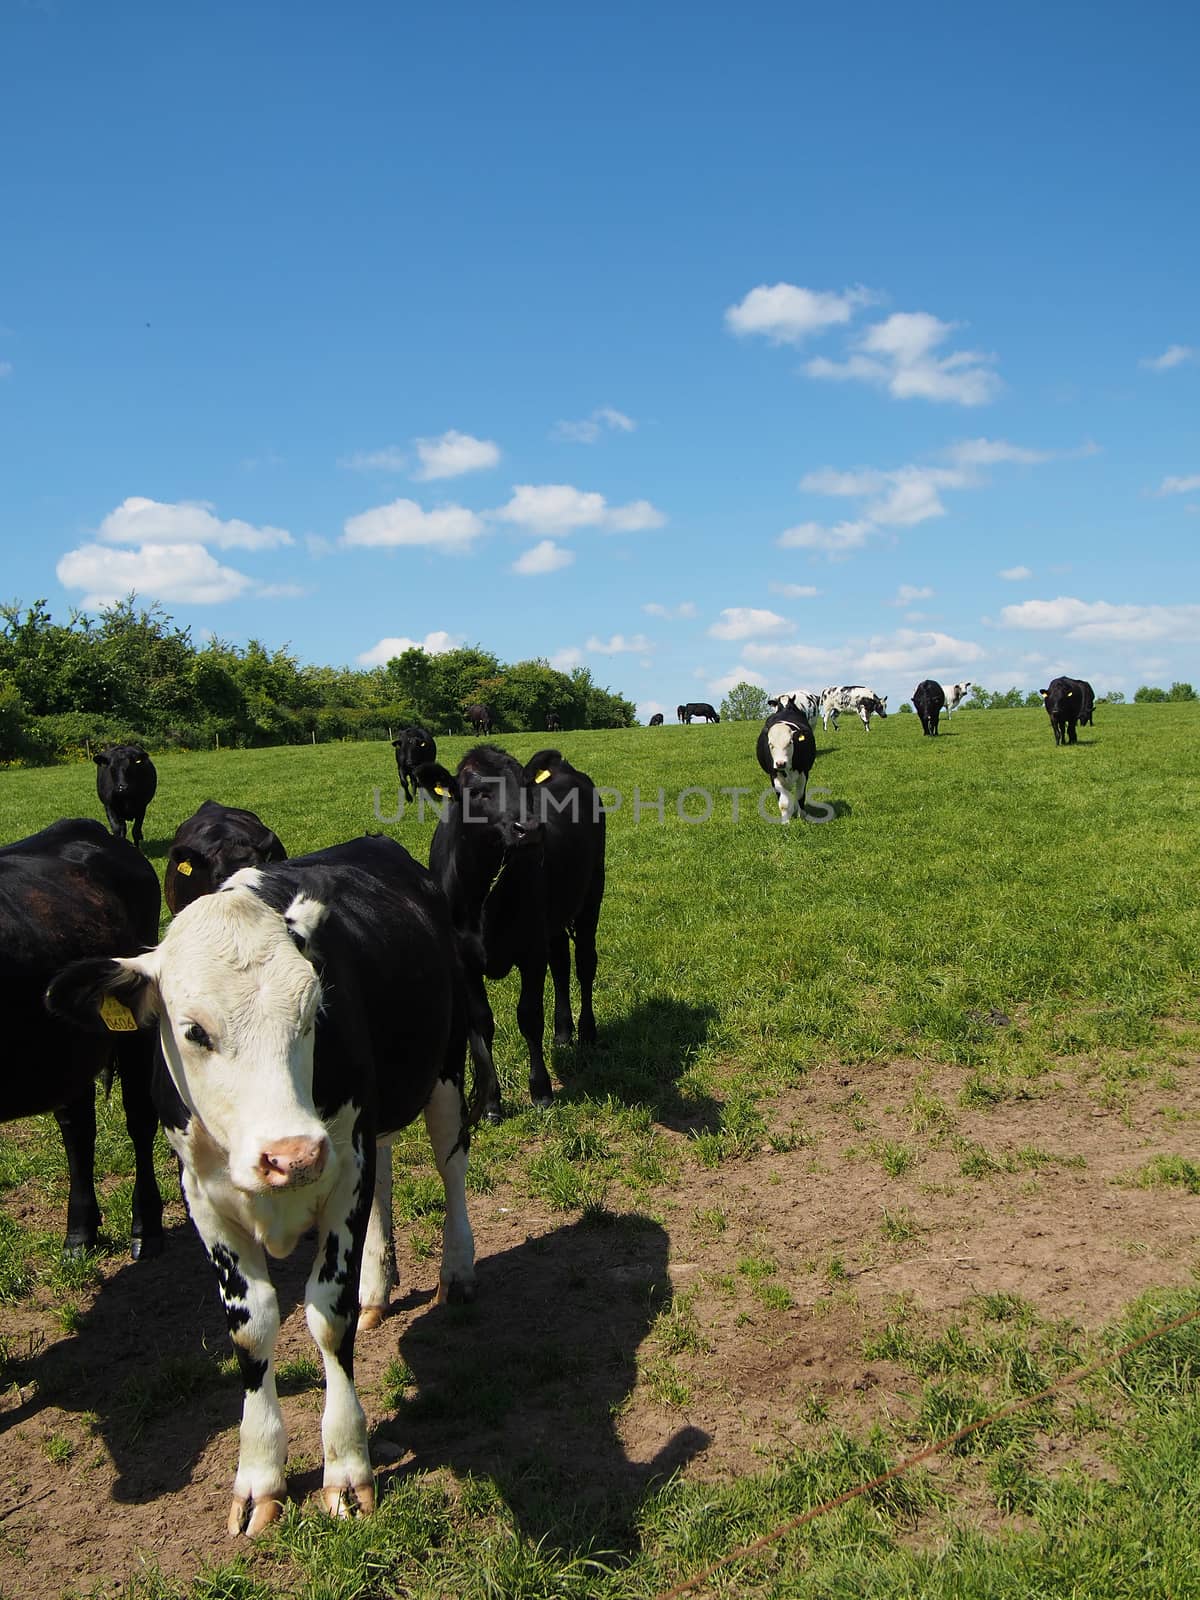 A herd of black and white cattle walking through a green field on a sunny day. 